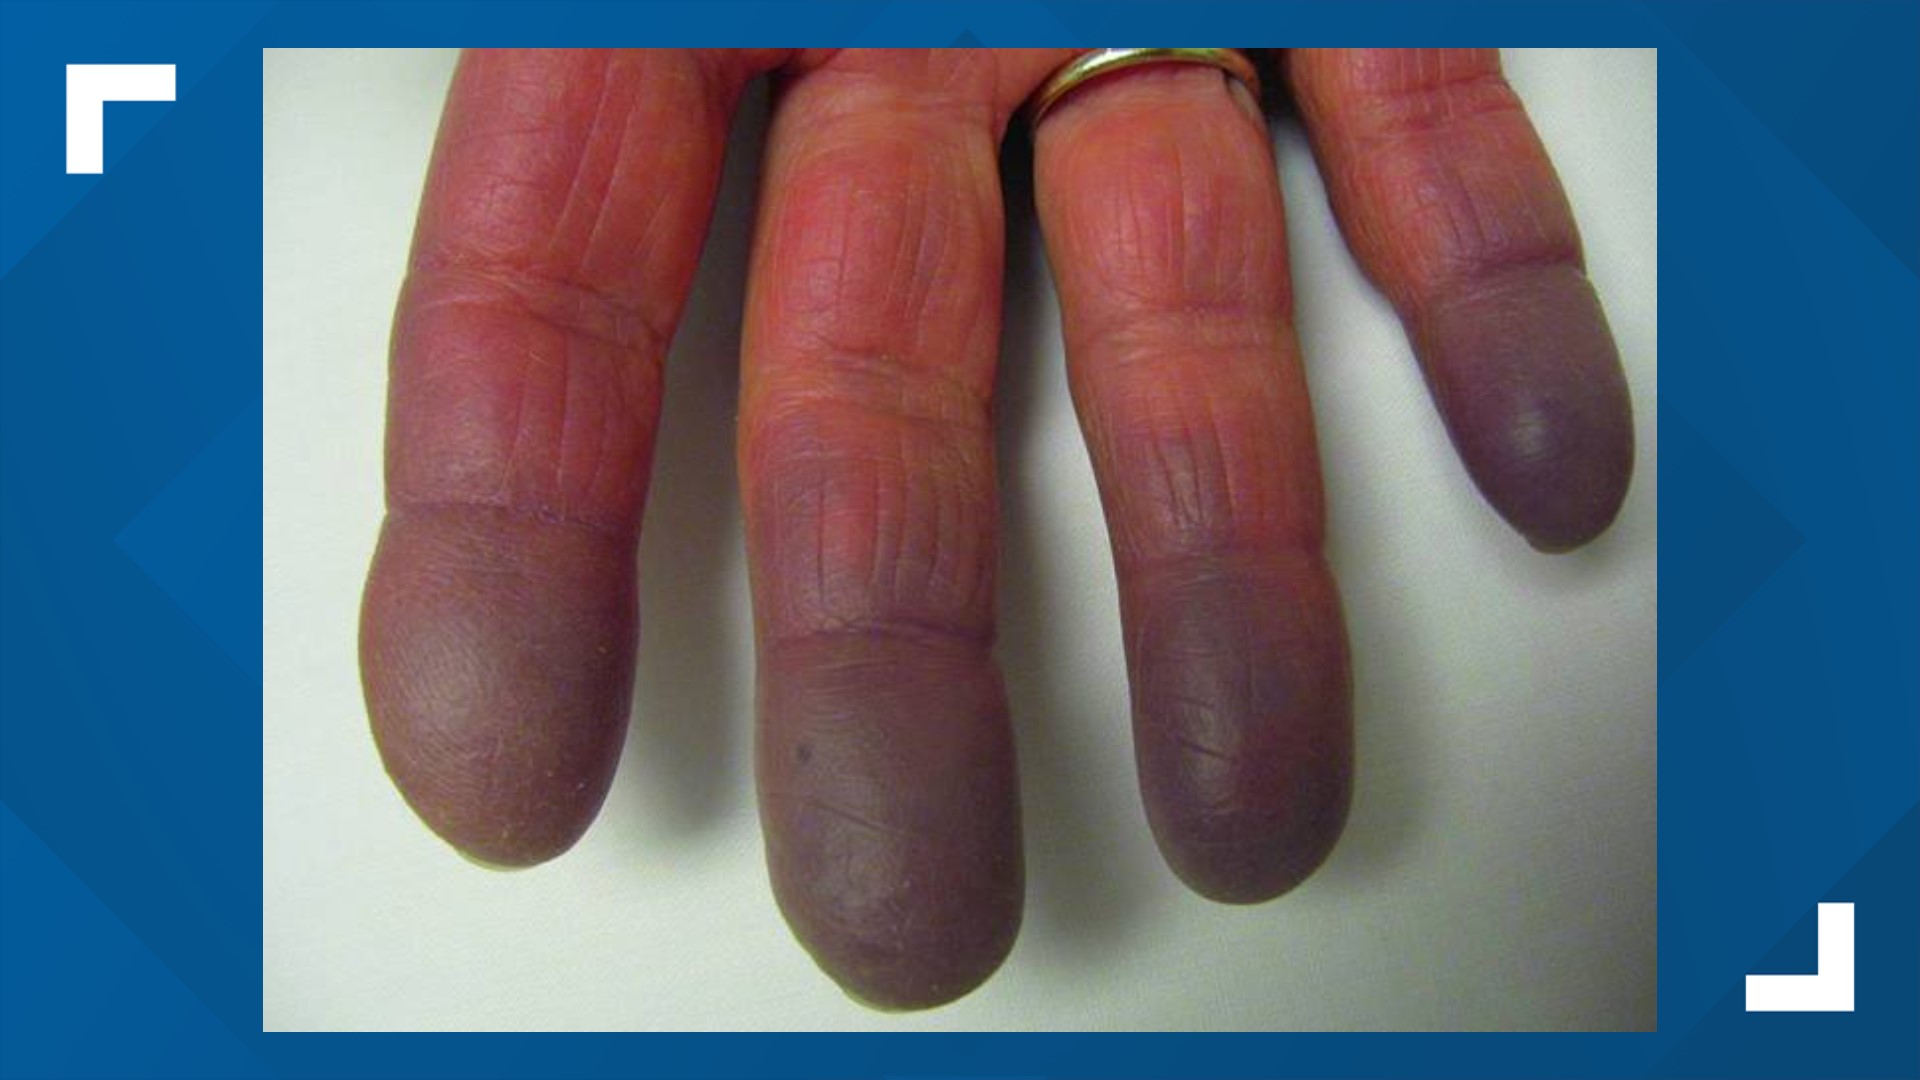 According to Mount Sinai, cyanosis can be a sign of a serious medical problem.